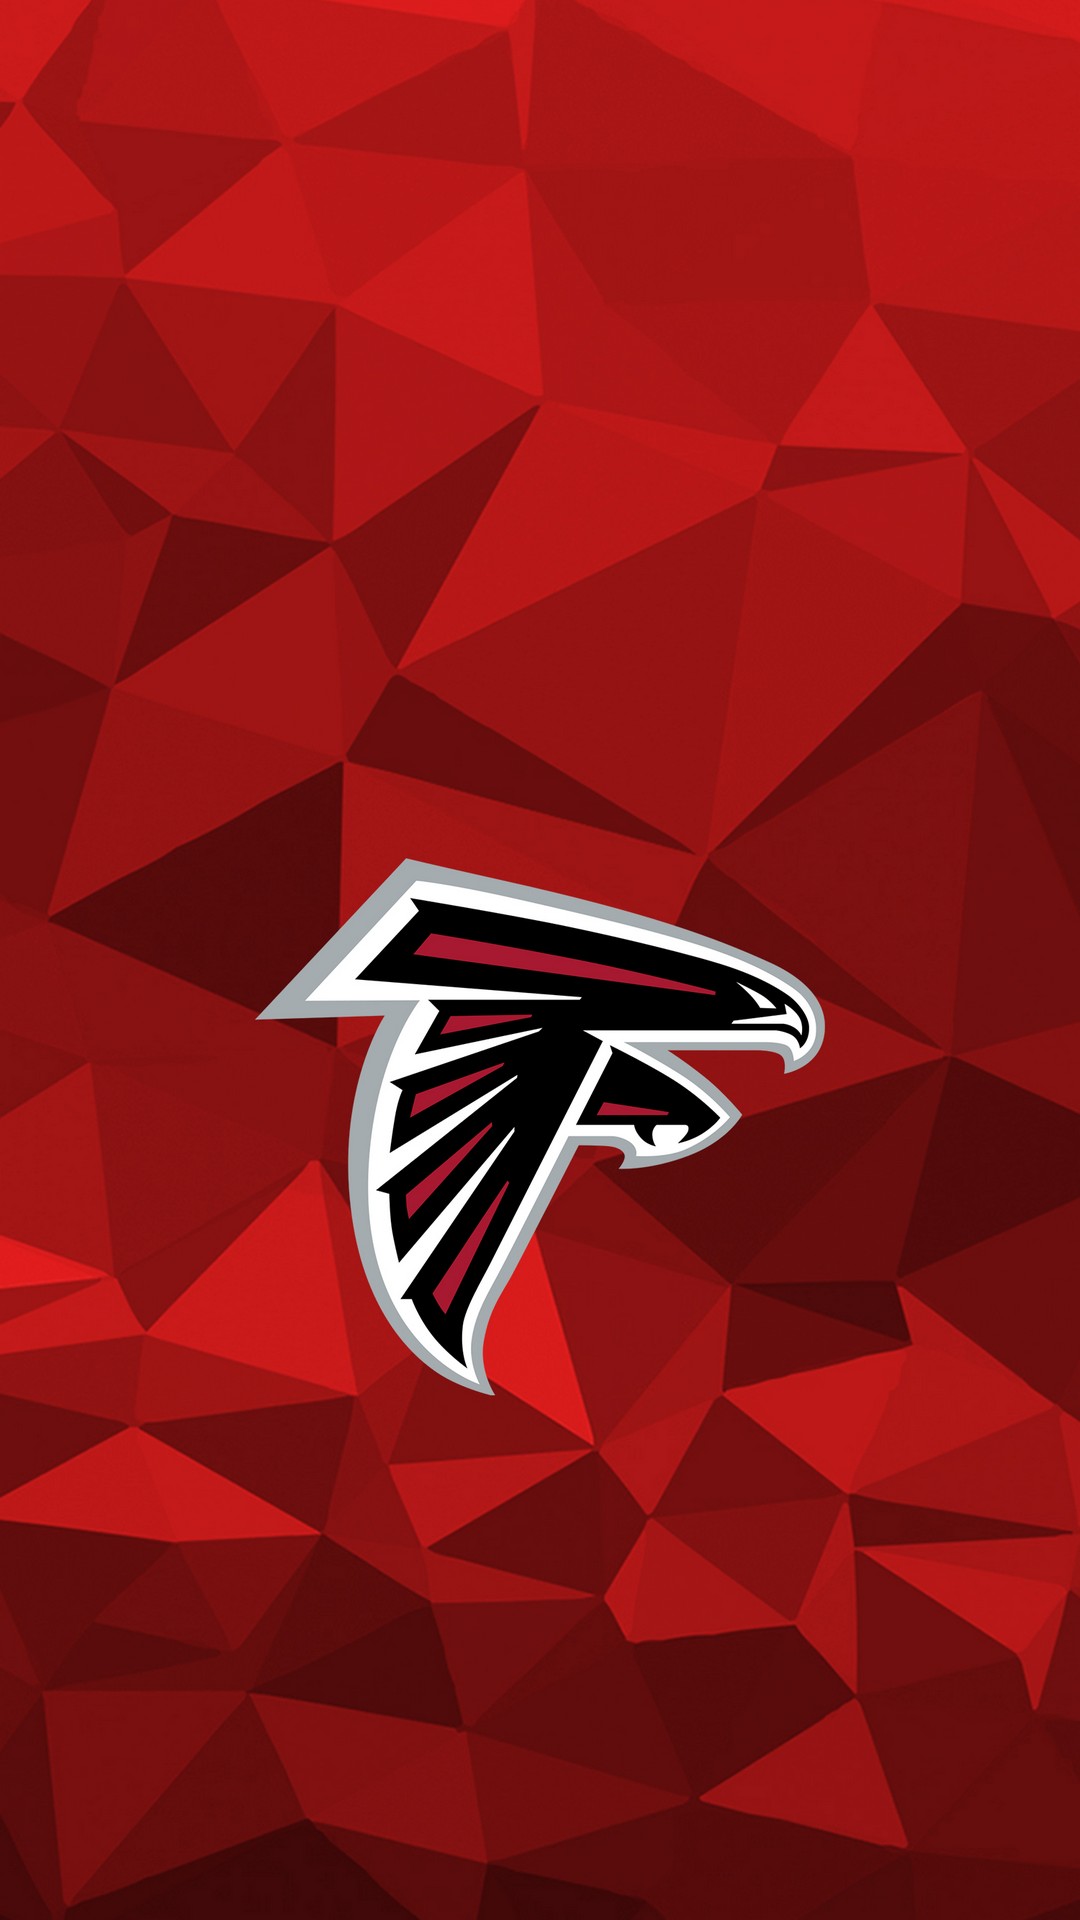 Atlanta Falcons iPhone Lock Screen Wallpaper With high-resolution 1080X1920 pixel. Donwload and set as wallpaper for your iPhone X, iPhone XS home screen backgrounds, XS Max, XR, iPhone8 lock screen wallpaper, iPhone 7, 6, SE, and other mobile devices